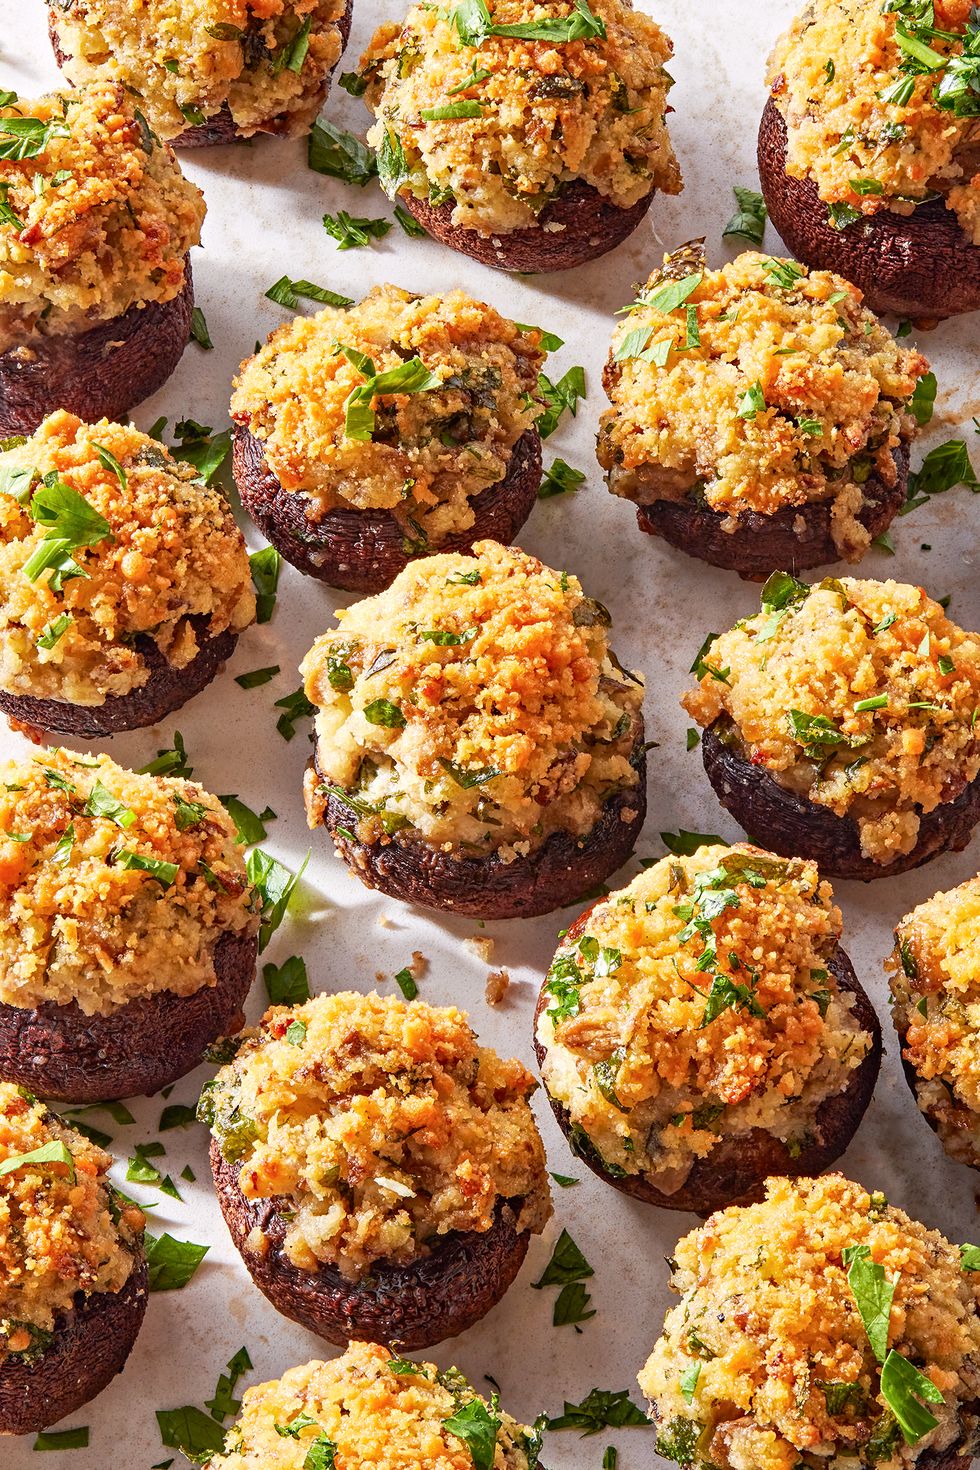 80 Best Bite-Sized Party Appetizers - Easy Recipes For Finger Foods